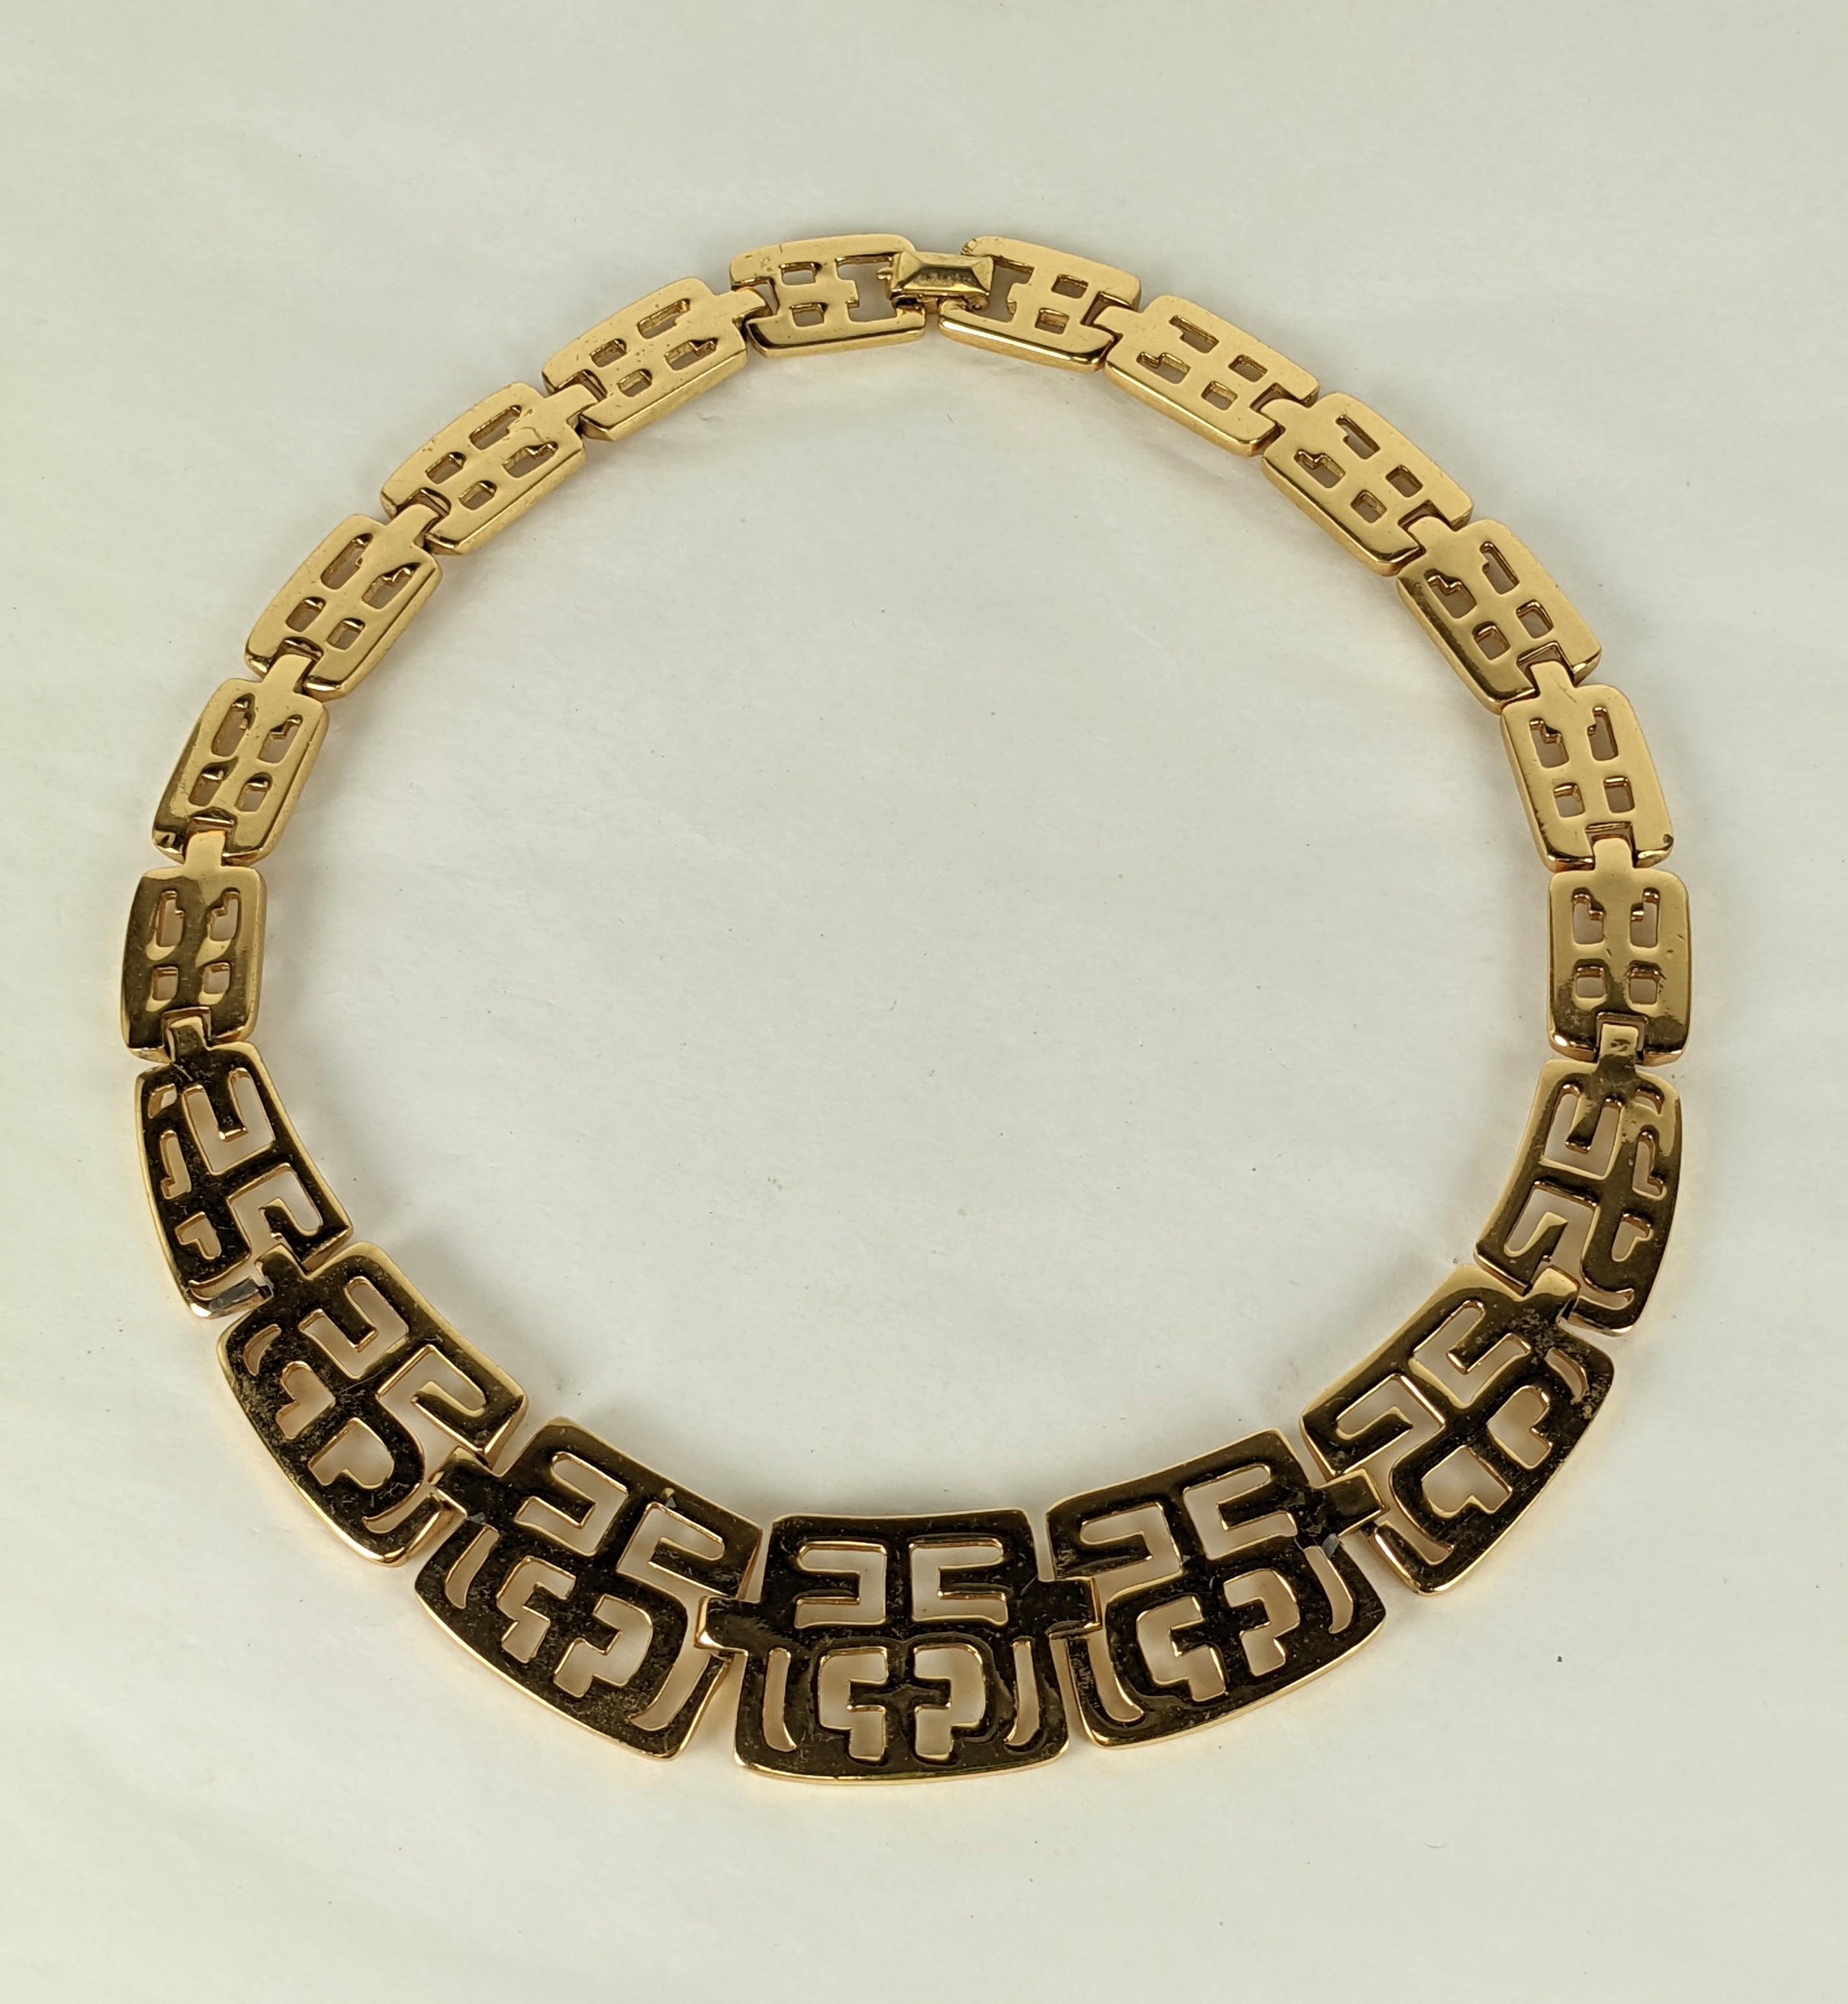 Elegant Trifari Pierced Gold Collar from the 1970's with graduated links. Pierced designs of abstract symbols.  Length 17